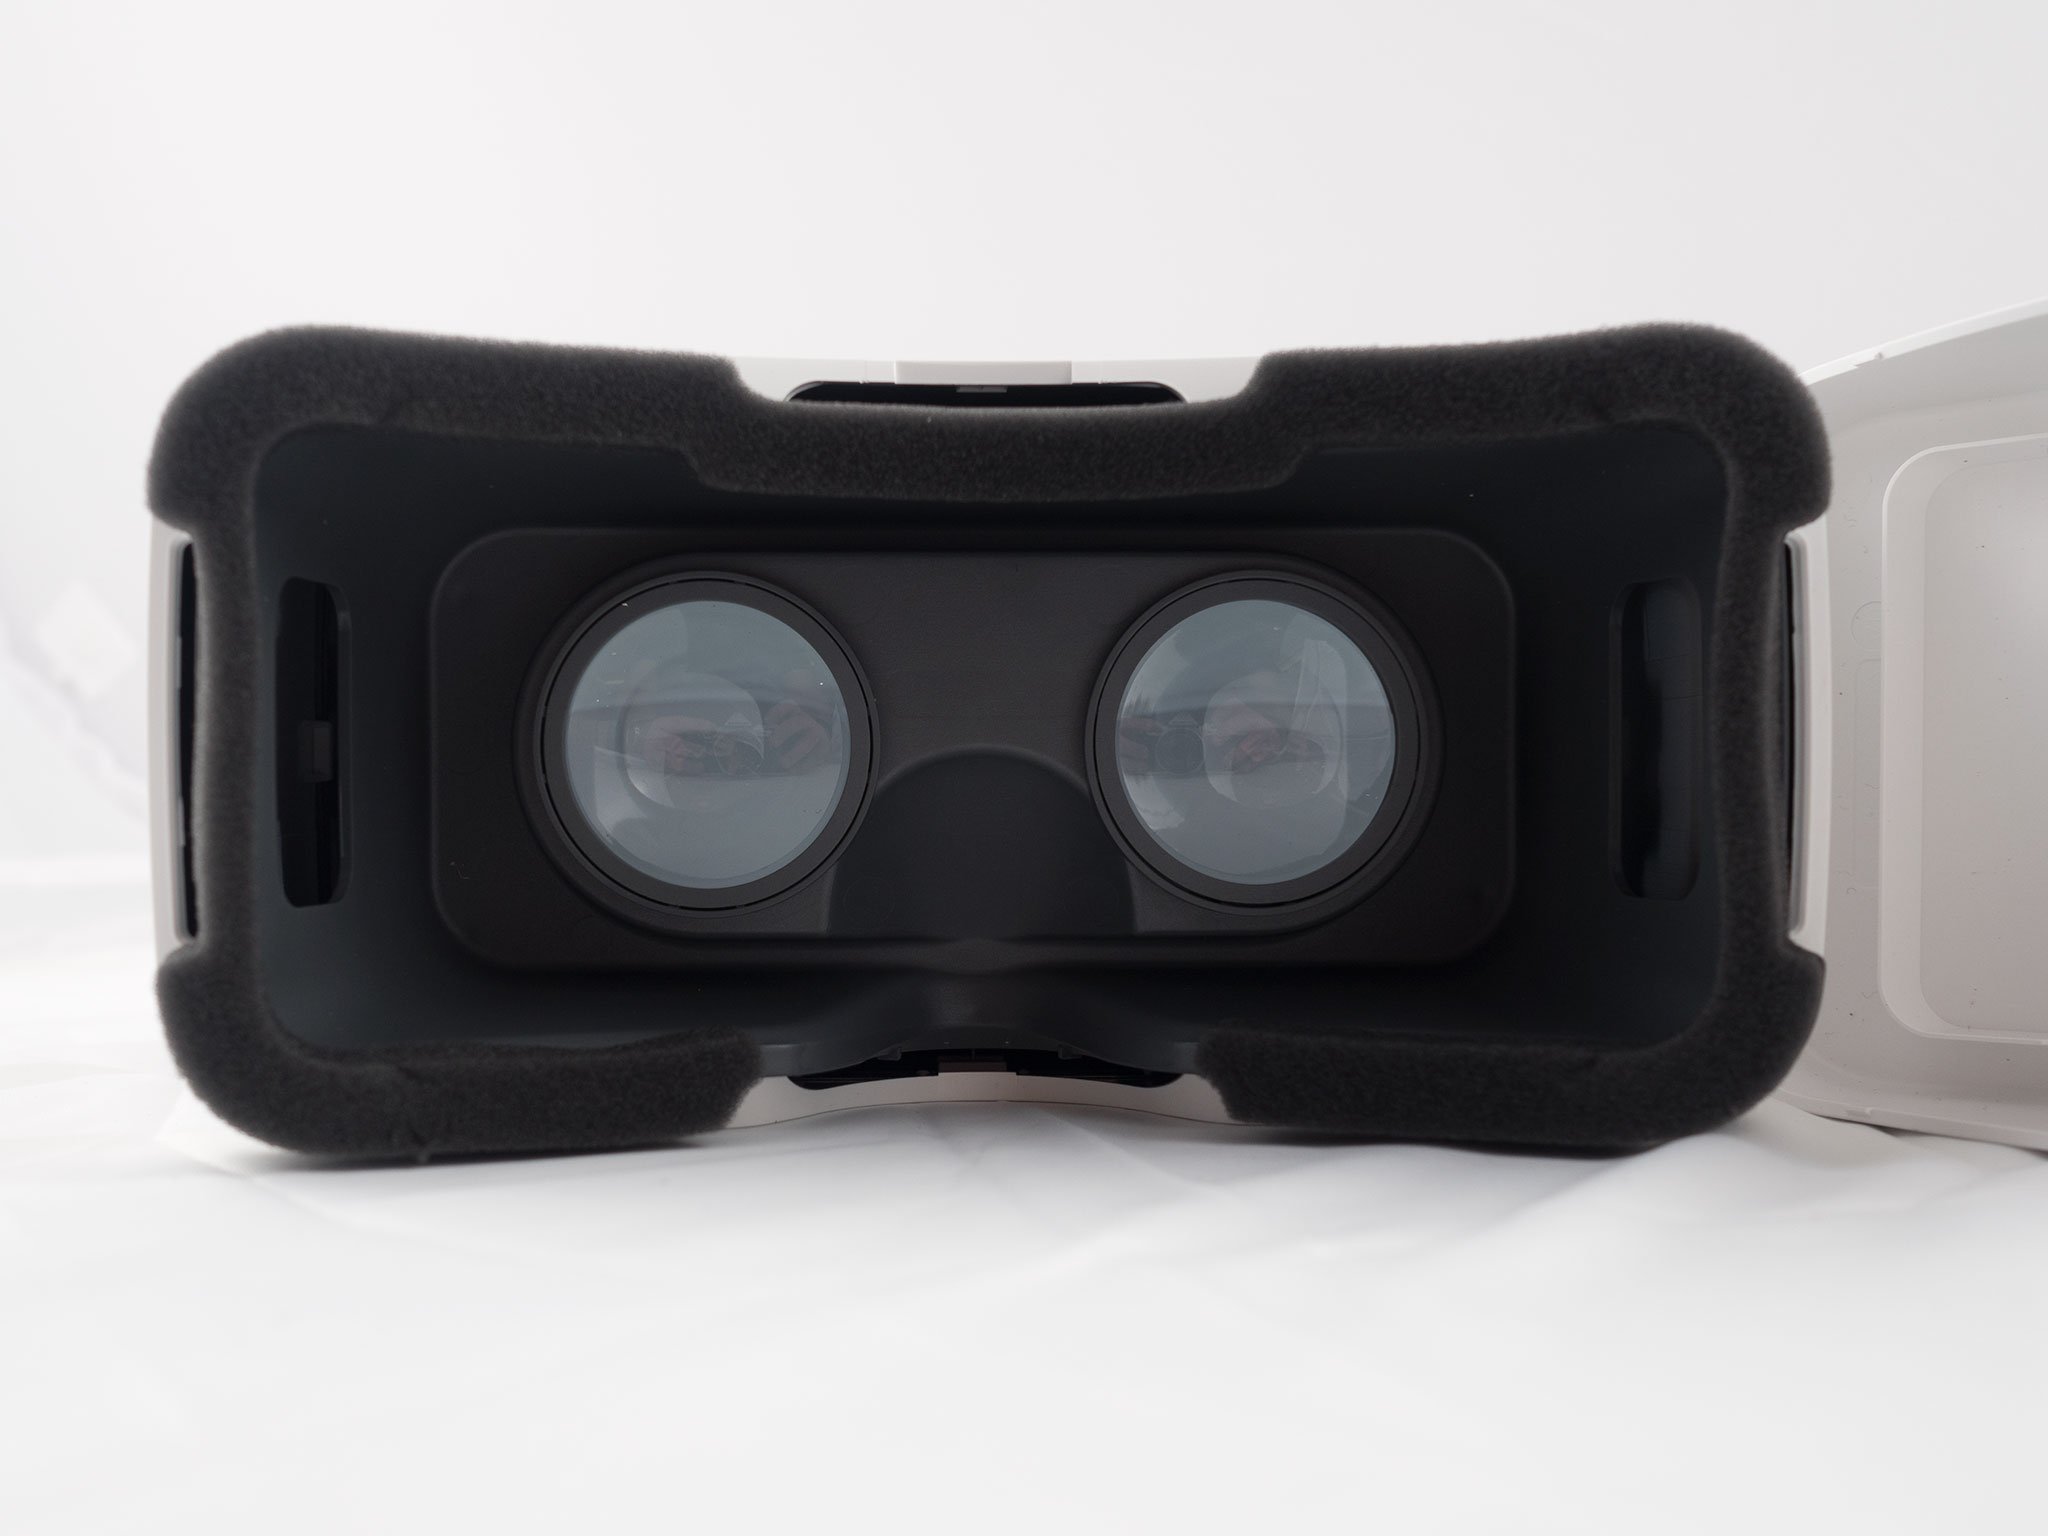 Alcatel&#39;s rumored Idol Pro 4 may ship with a VR headset in the box